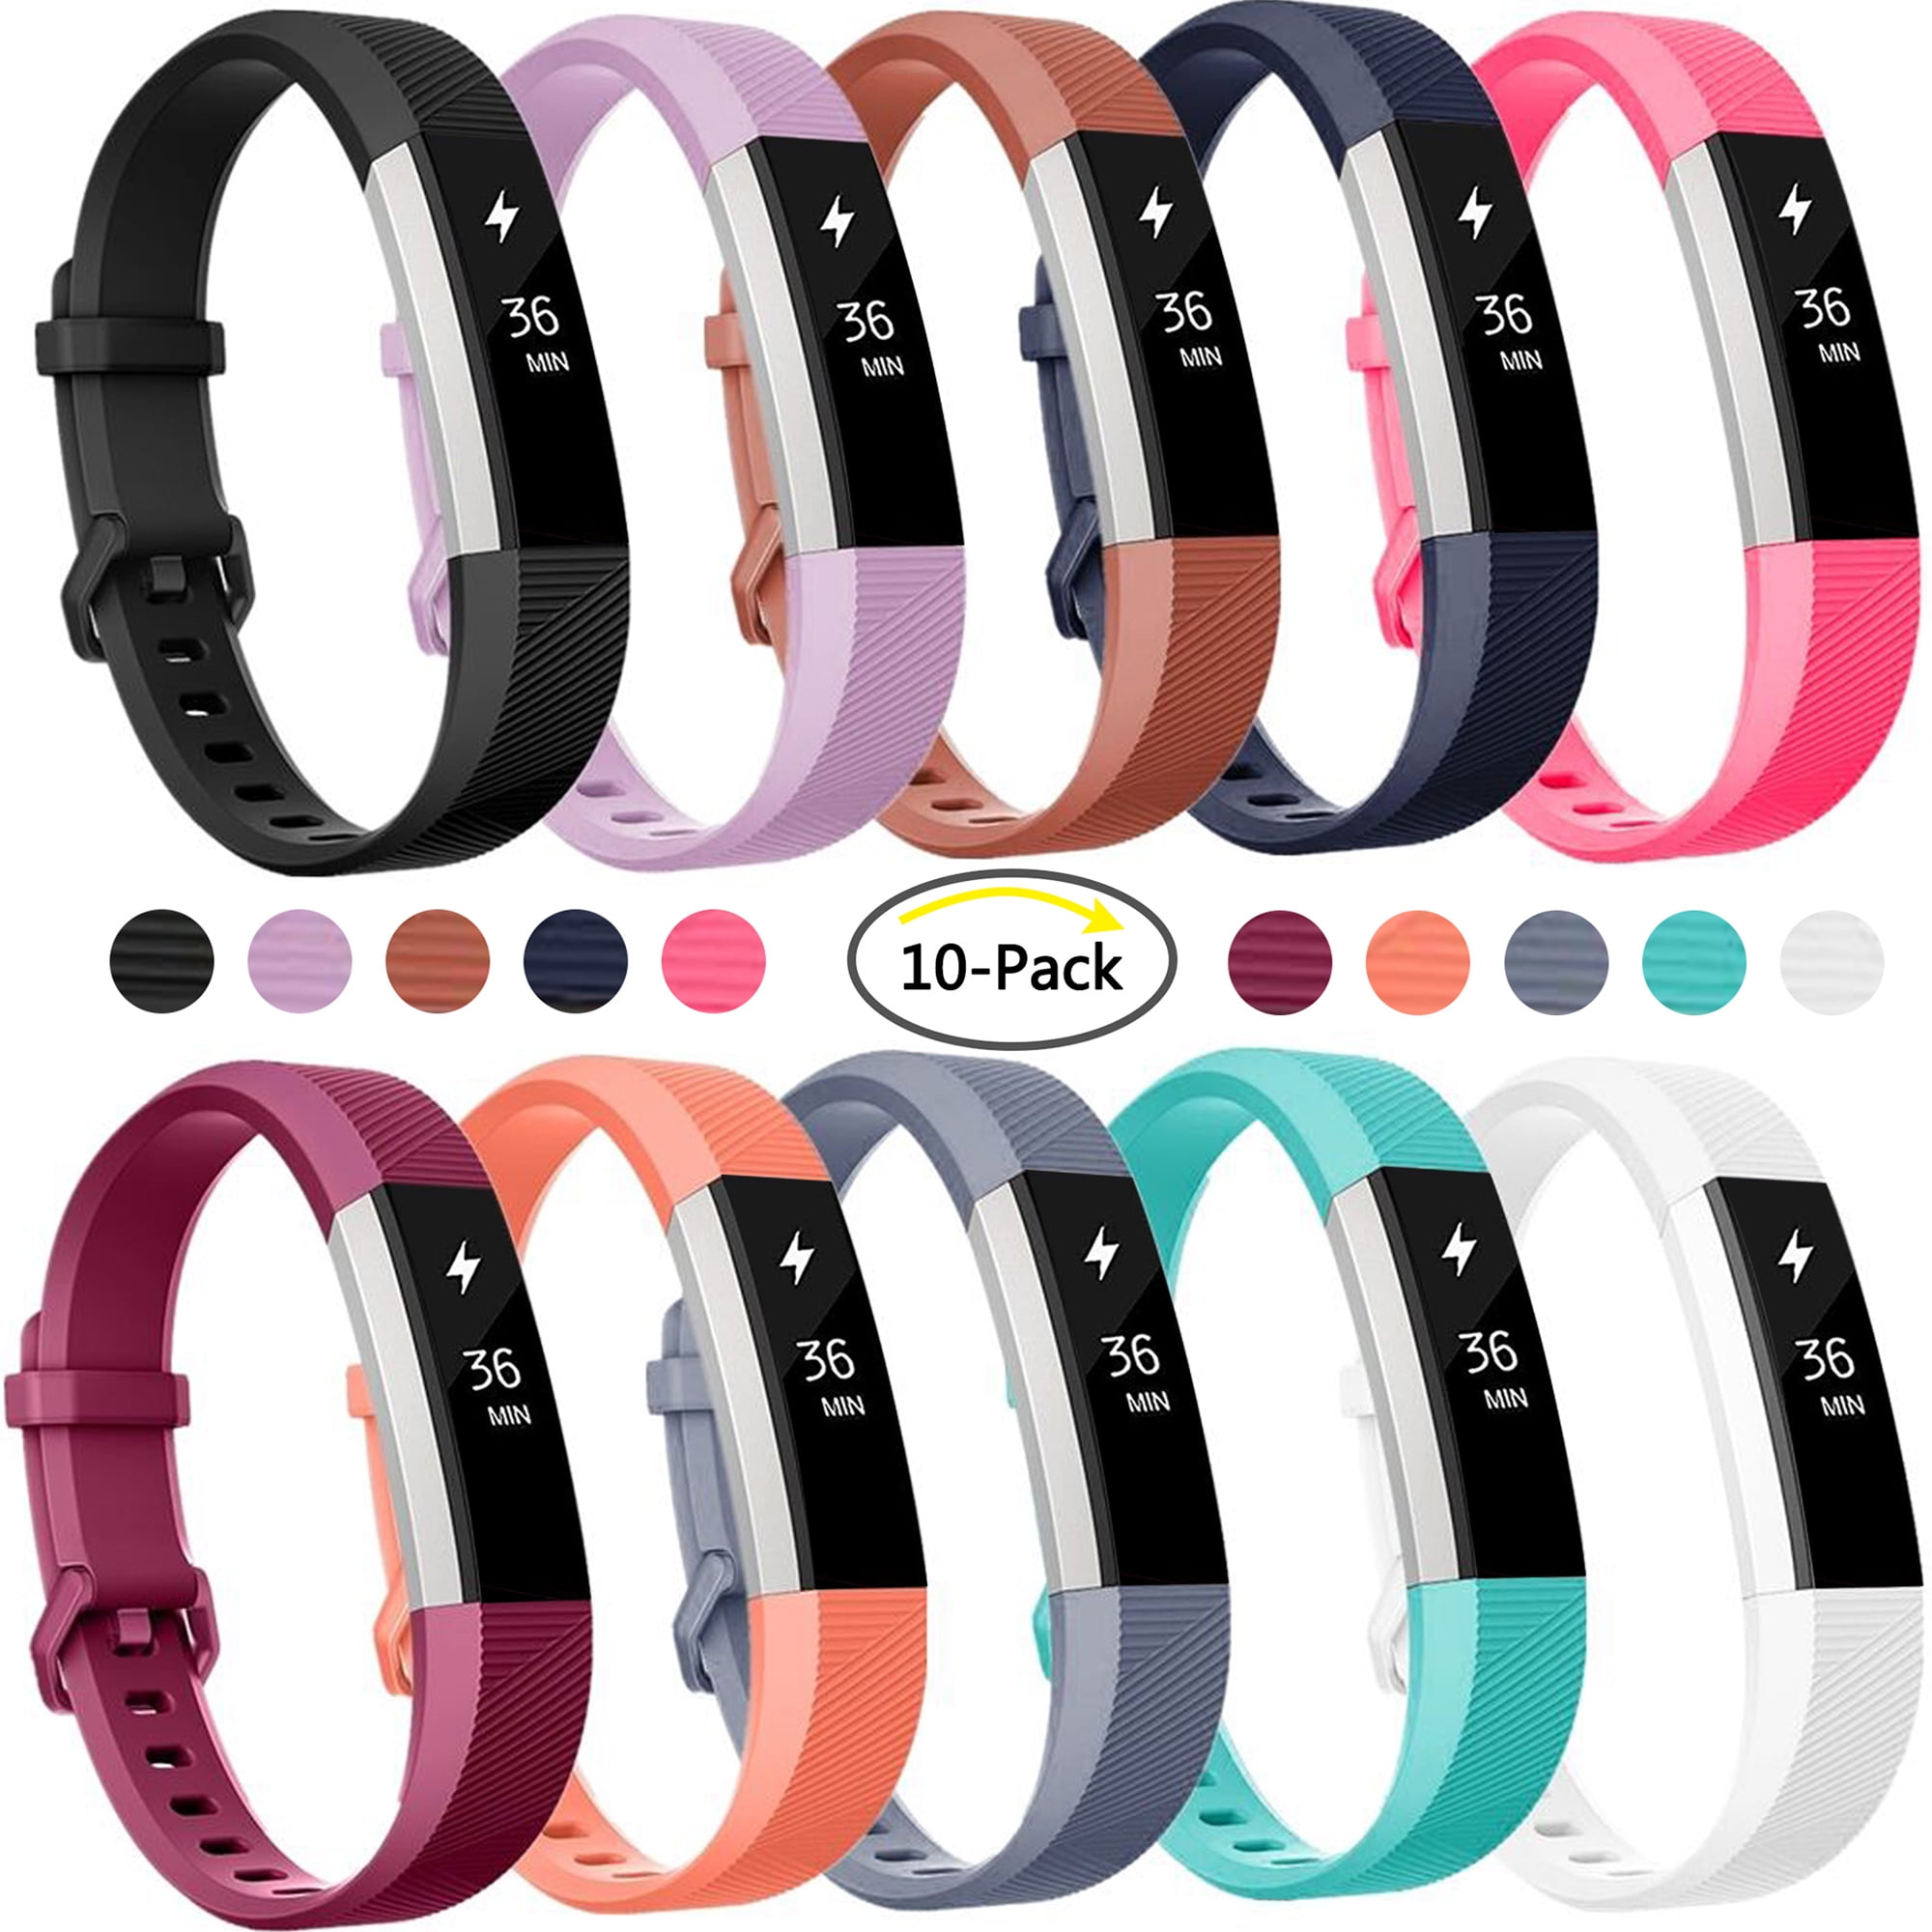 Lot of 10 Replacement Silicone Bands For Fitbit Alta HR LARGE Size Band